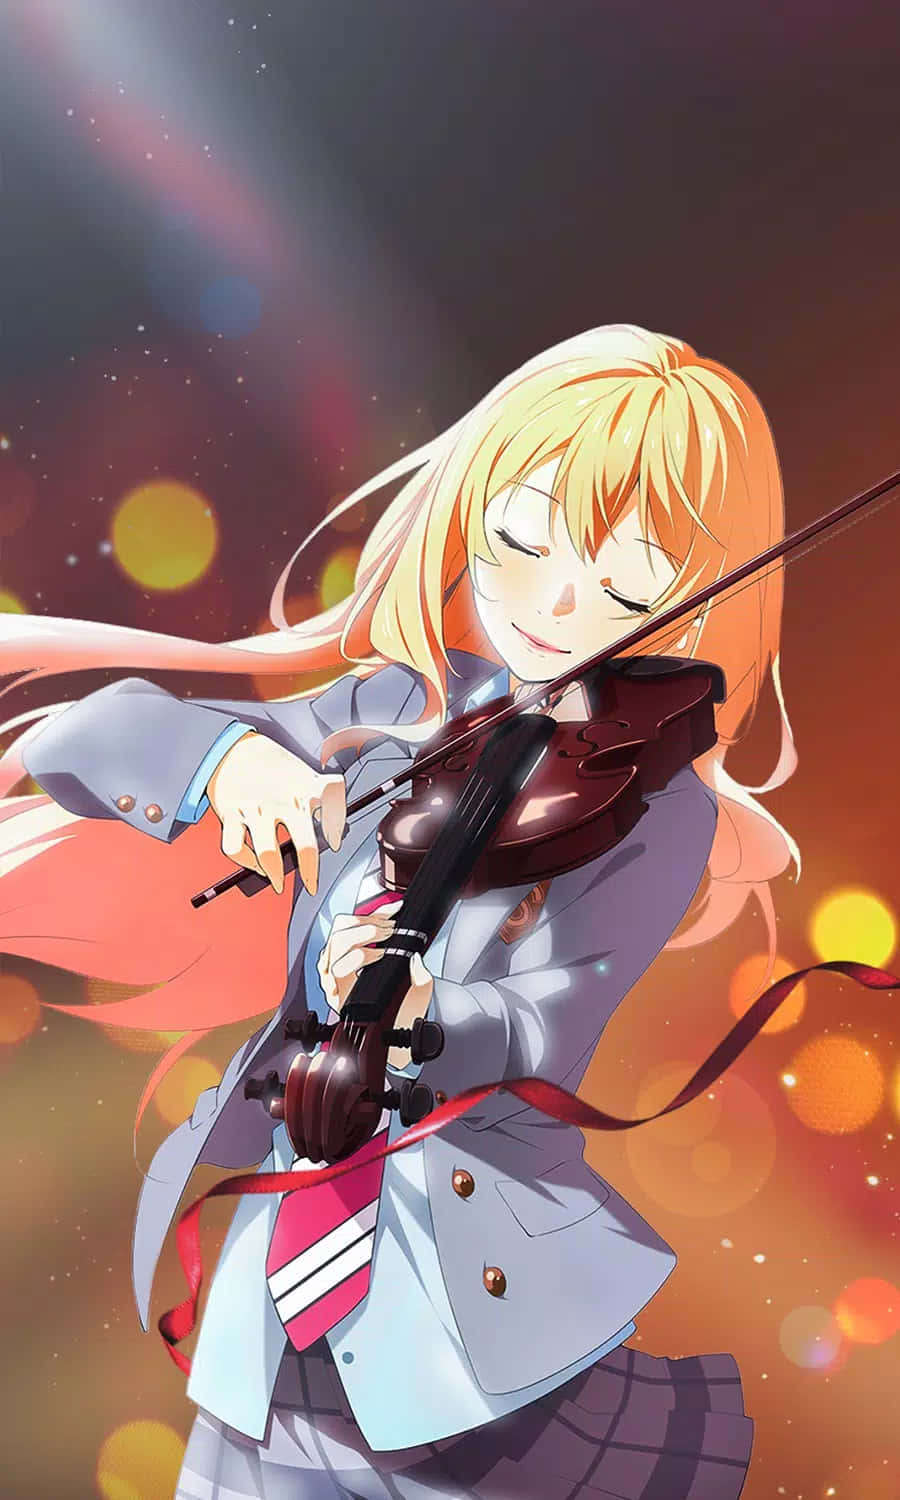 Playing The Violin For Girls Wallpaper